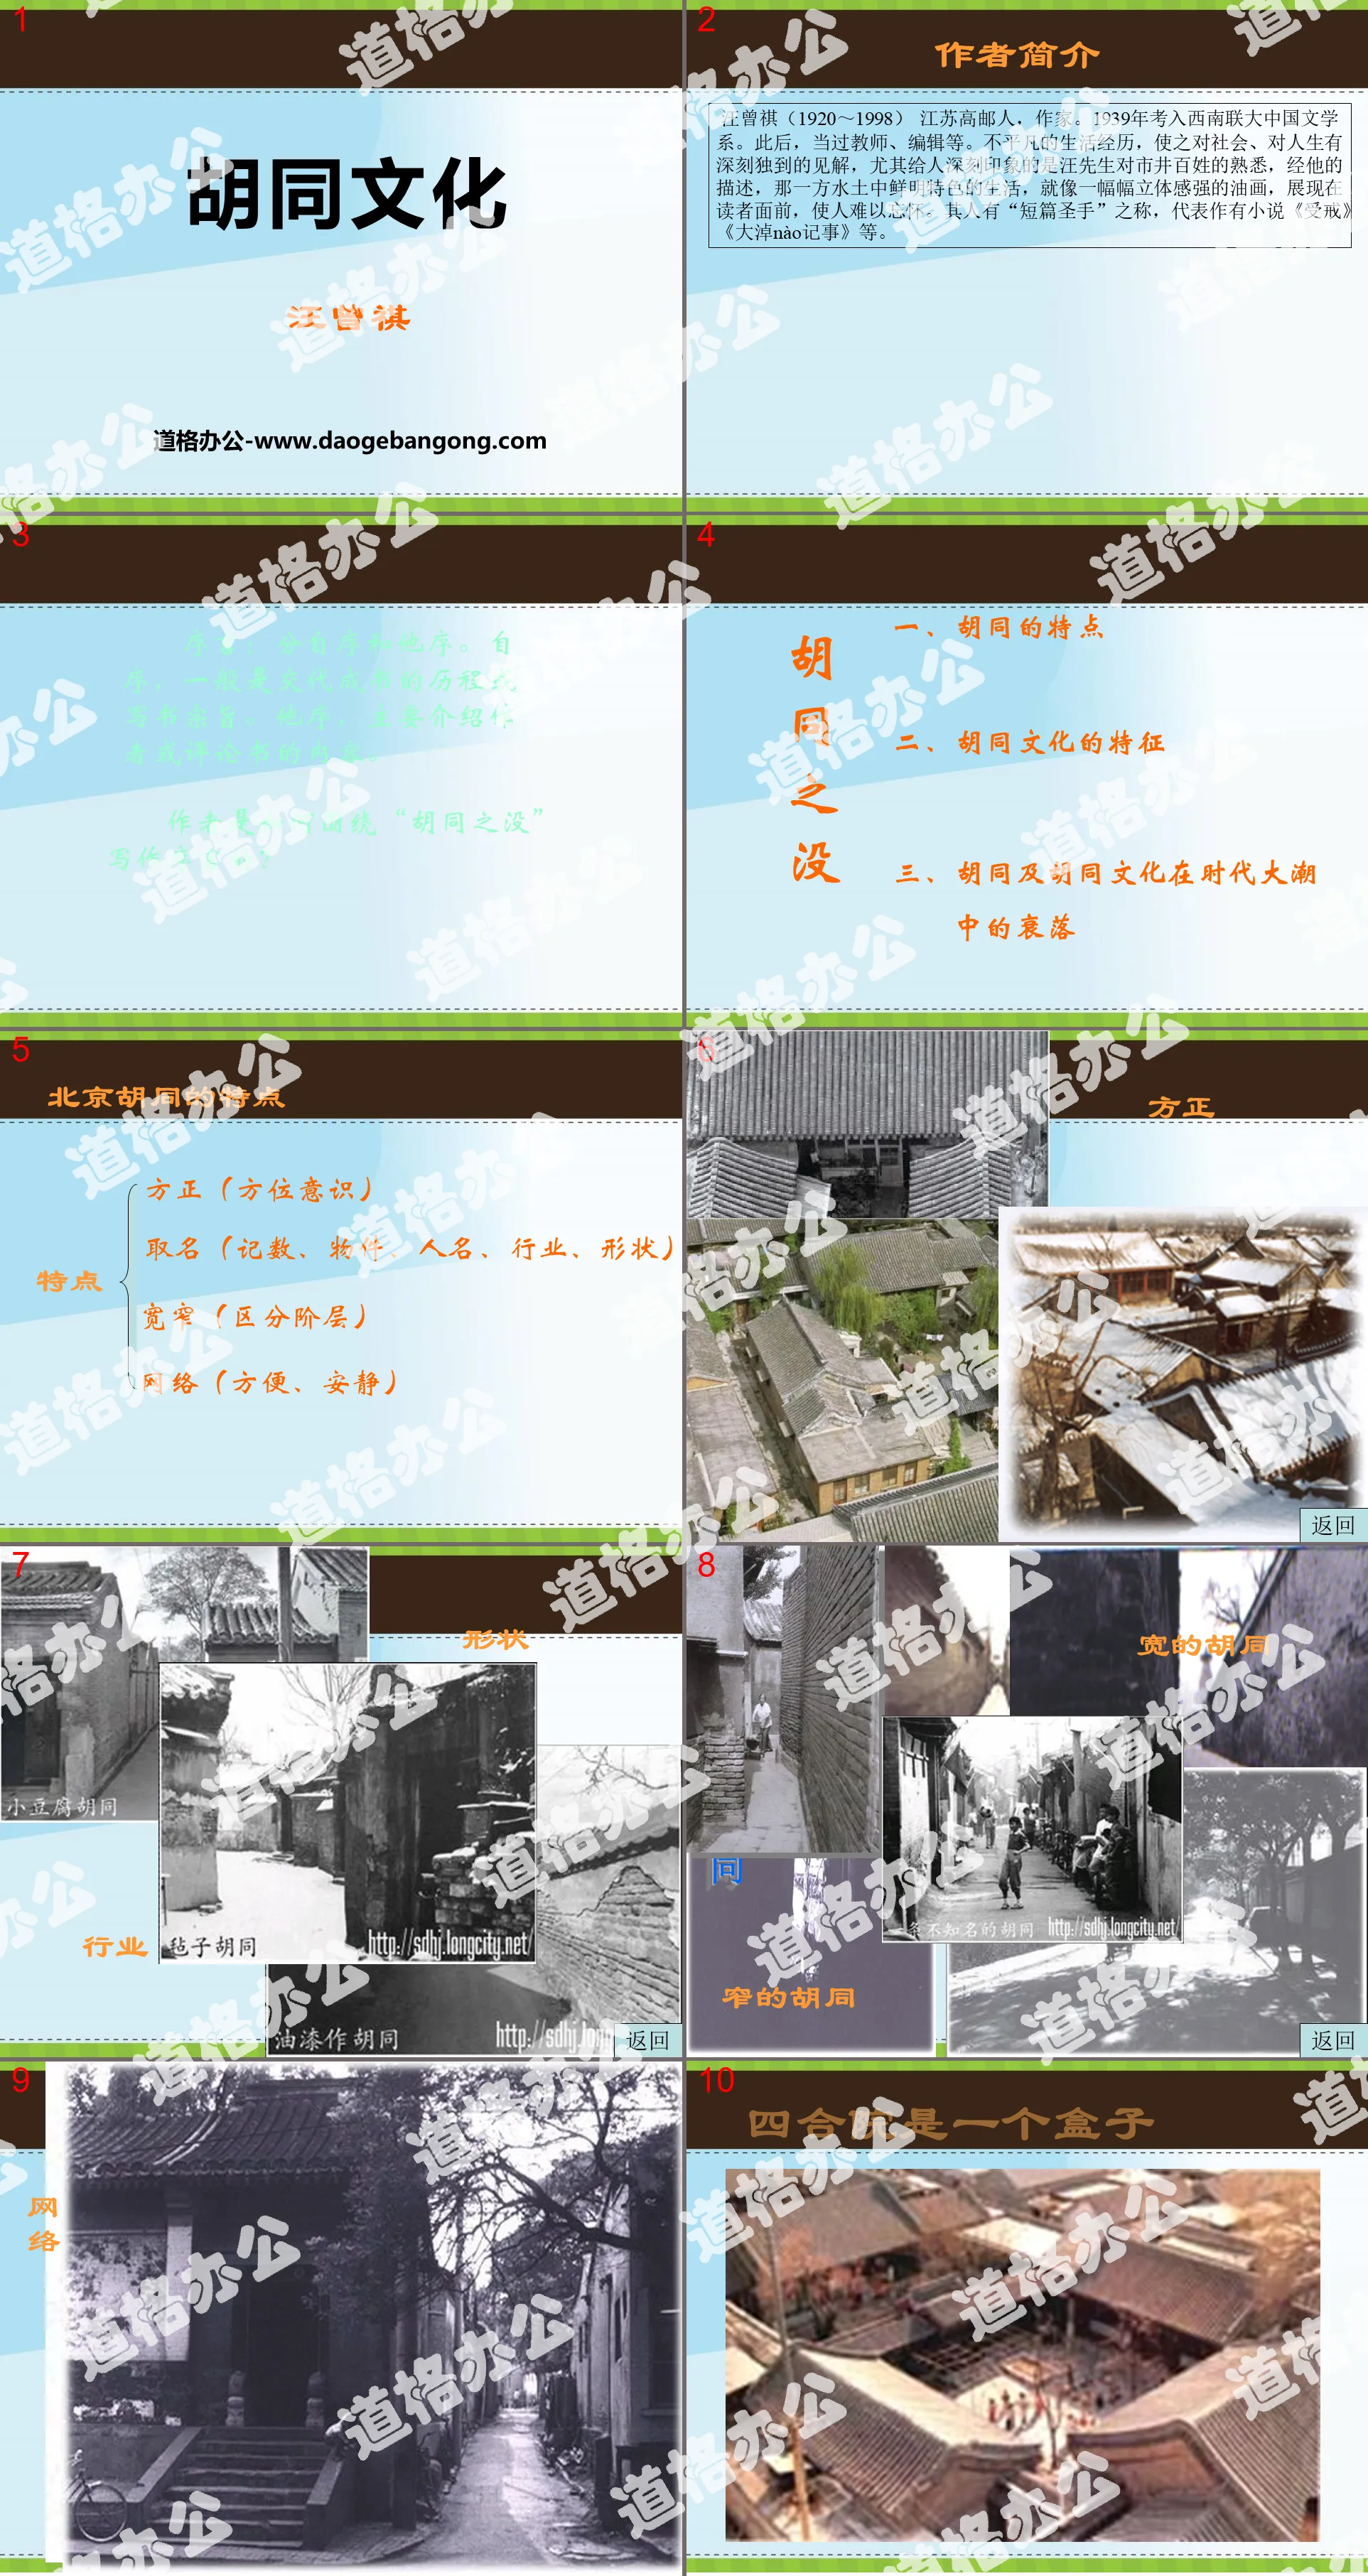 "Hutong Culture" PPT courseware